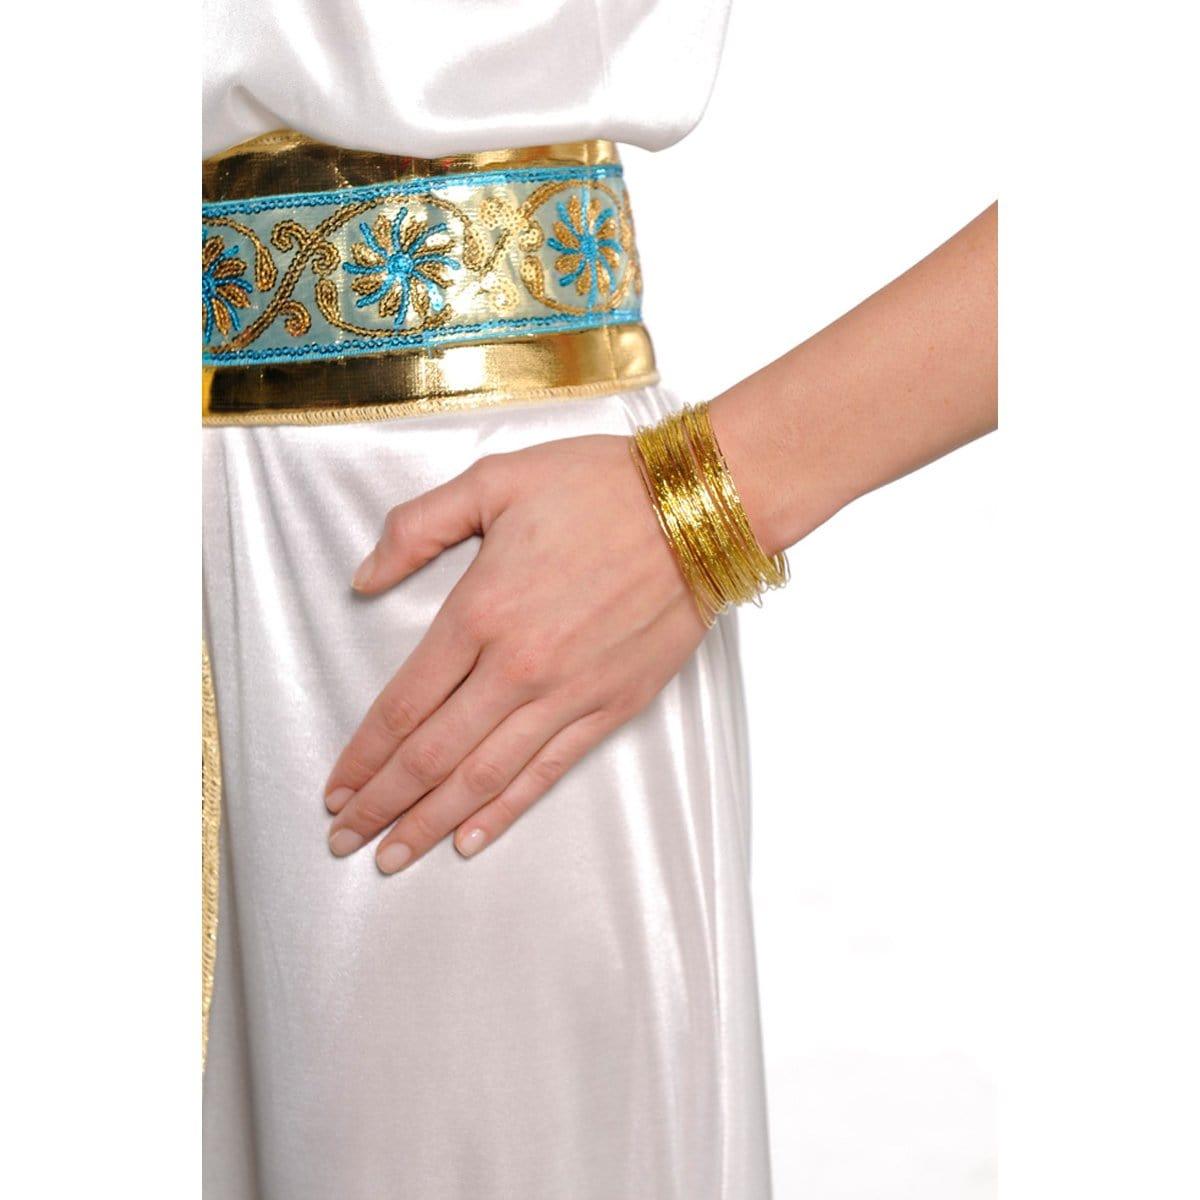 Buy Costume Accessories Gold bangle bracelets, 50 per package sold at Party Expert